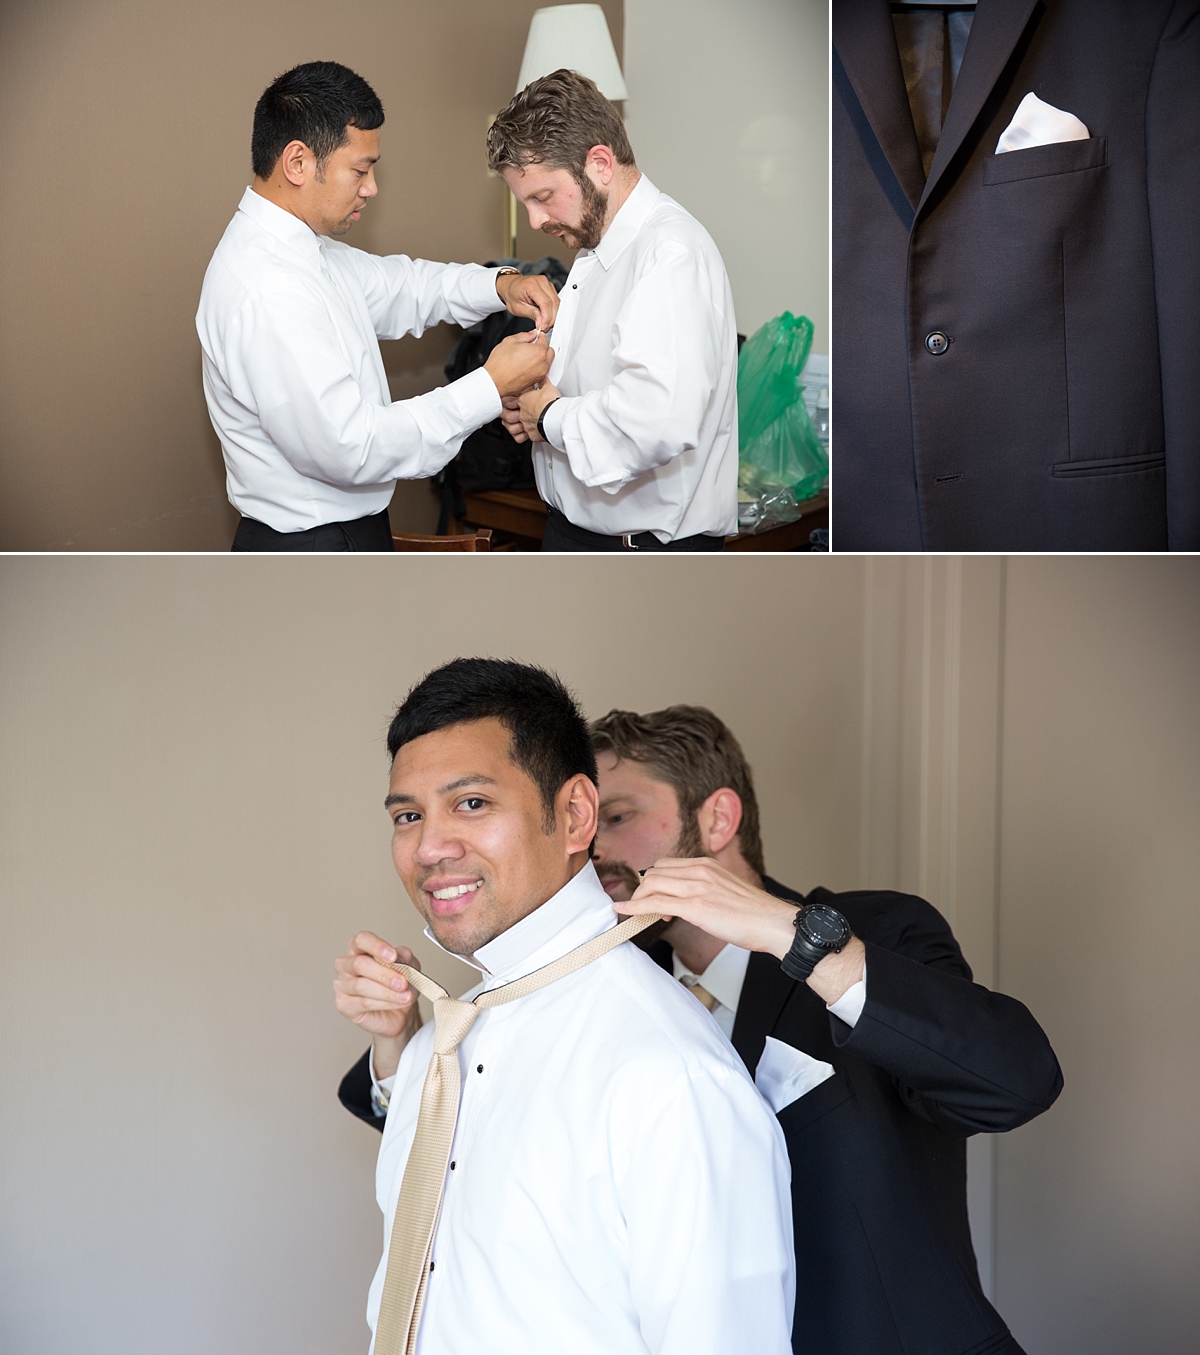 beardslee castle, little falls, ny, sarah heppell photography, groom gets ready on wedding day, groom wears cream tie and black suit on wedding day